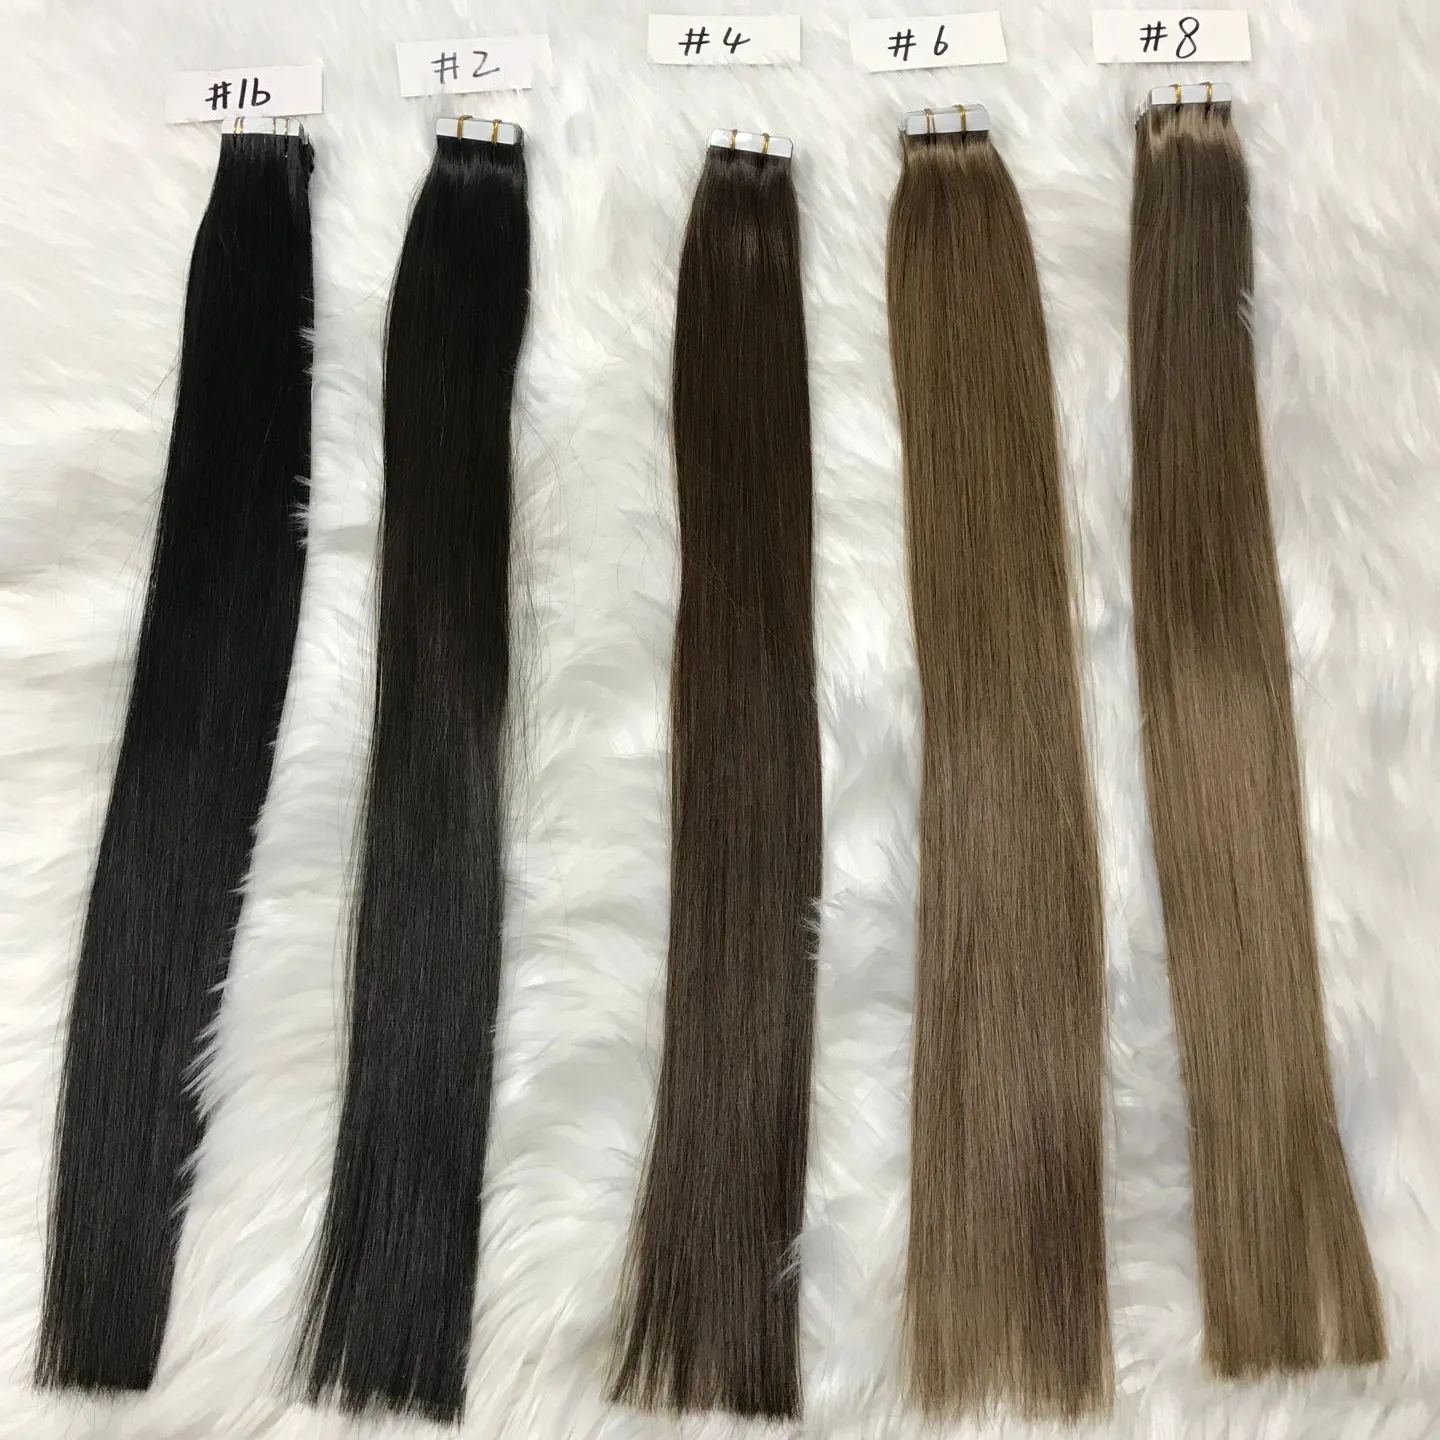 Ready To Ship Large Stock Top Quality Virgin Hair 100 Remy Human Double Drawn Tape Hair Extensions